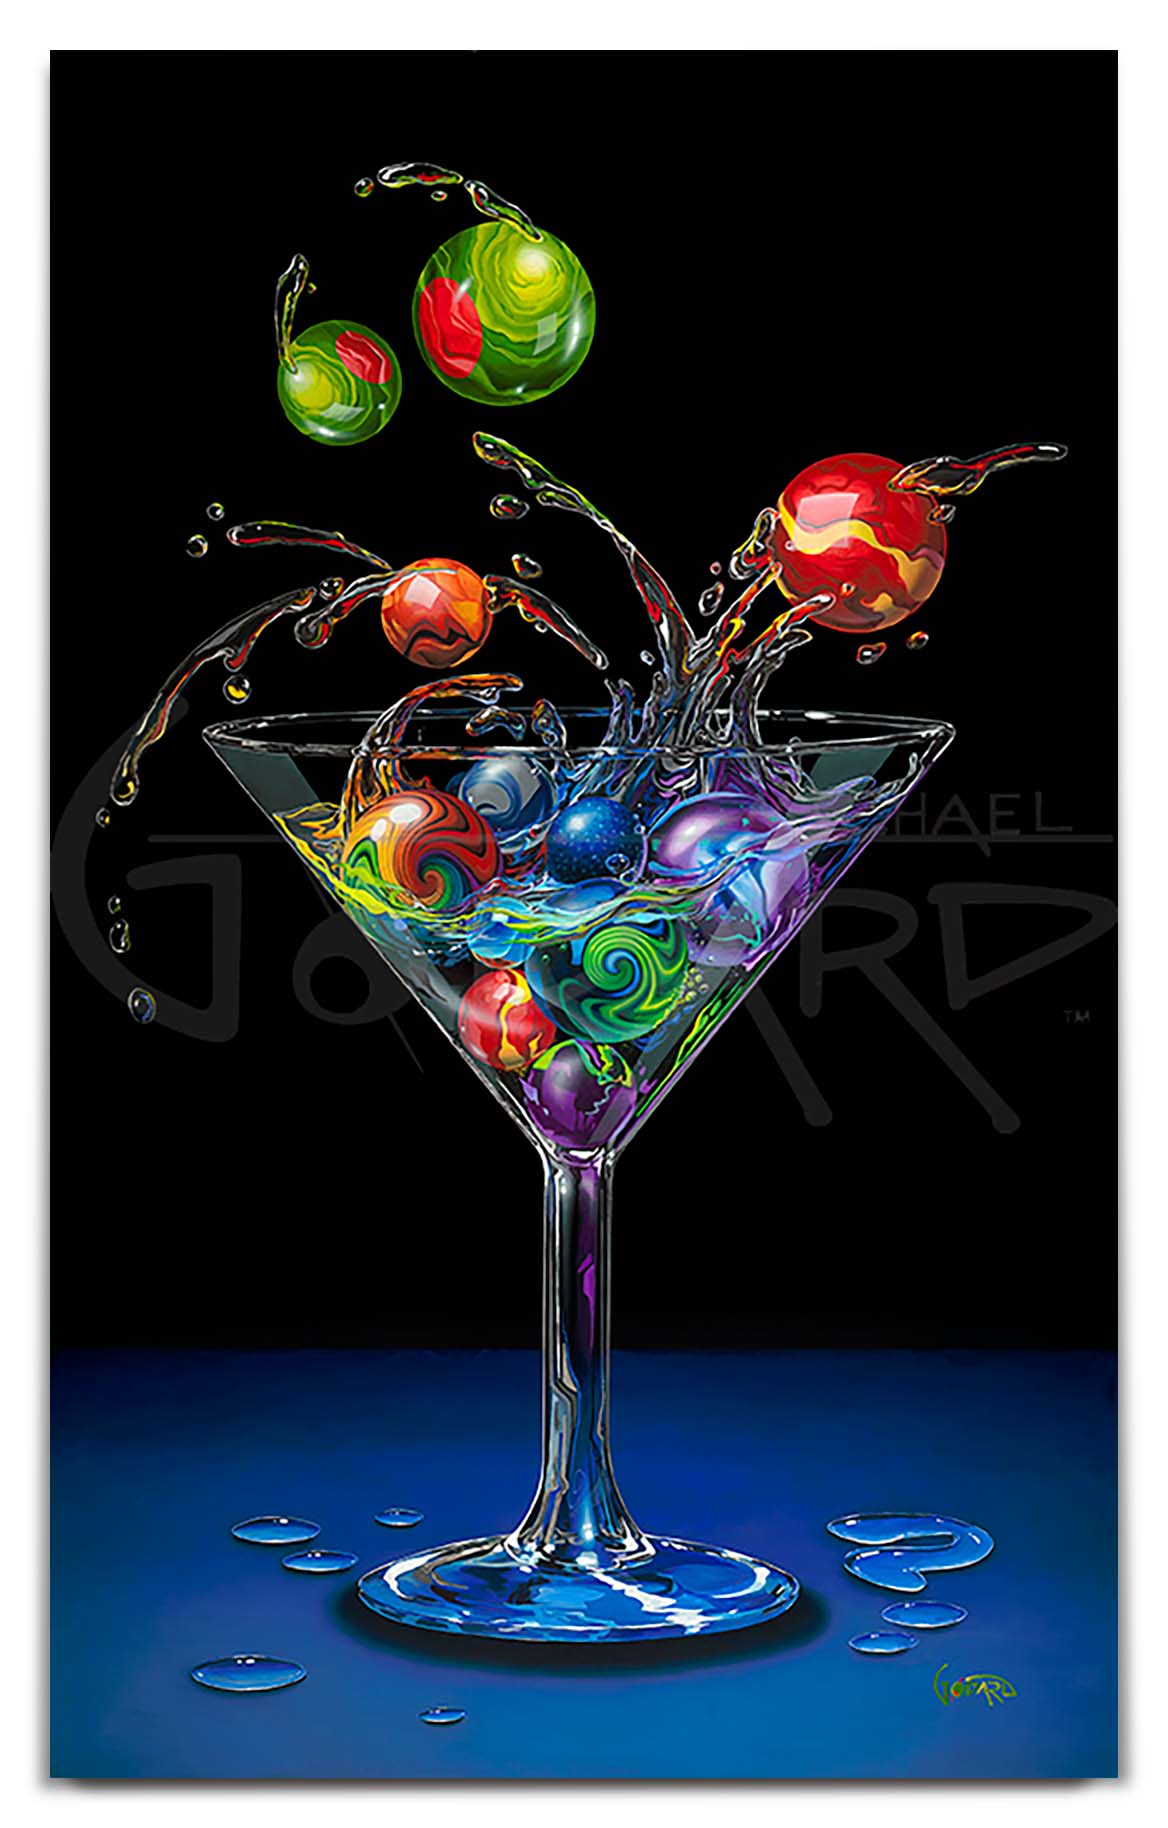 Michael Godard "Losing my Marbles" Limited Edition Canvas Giclee